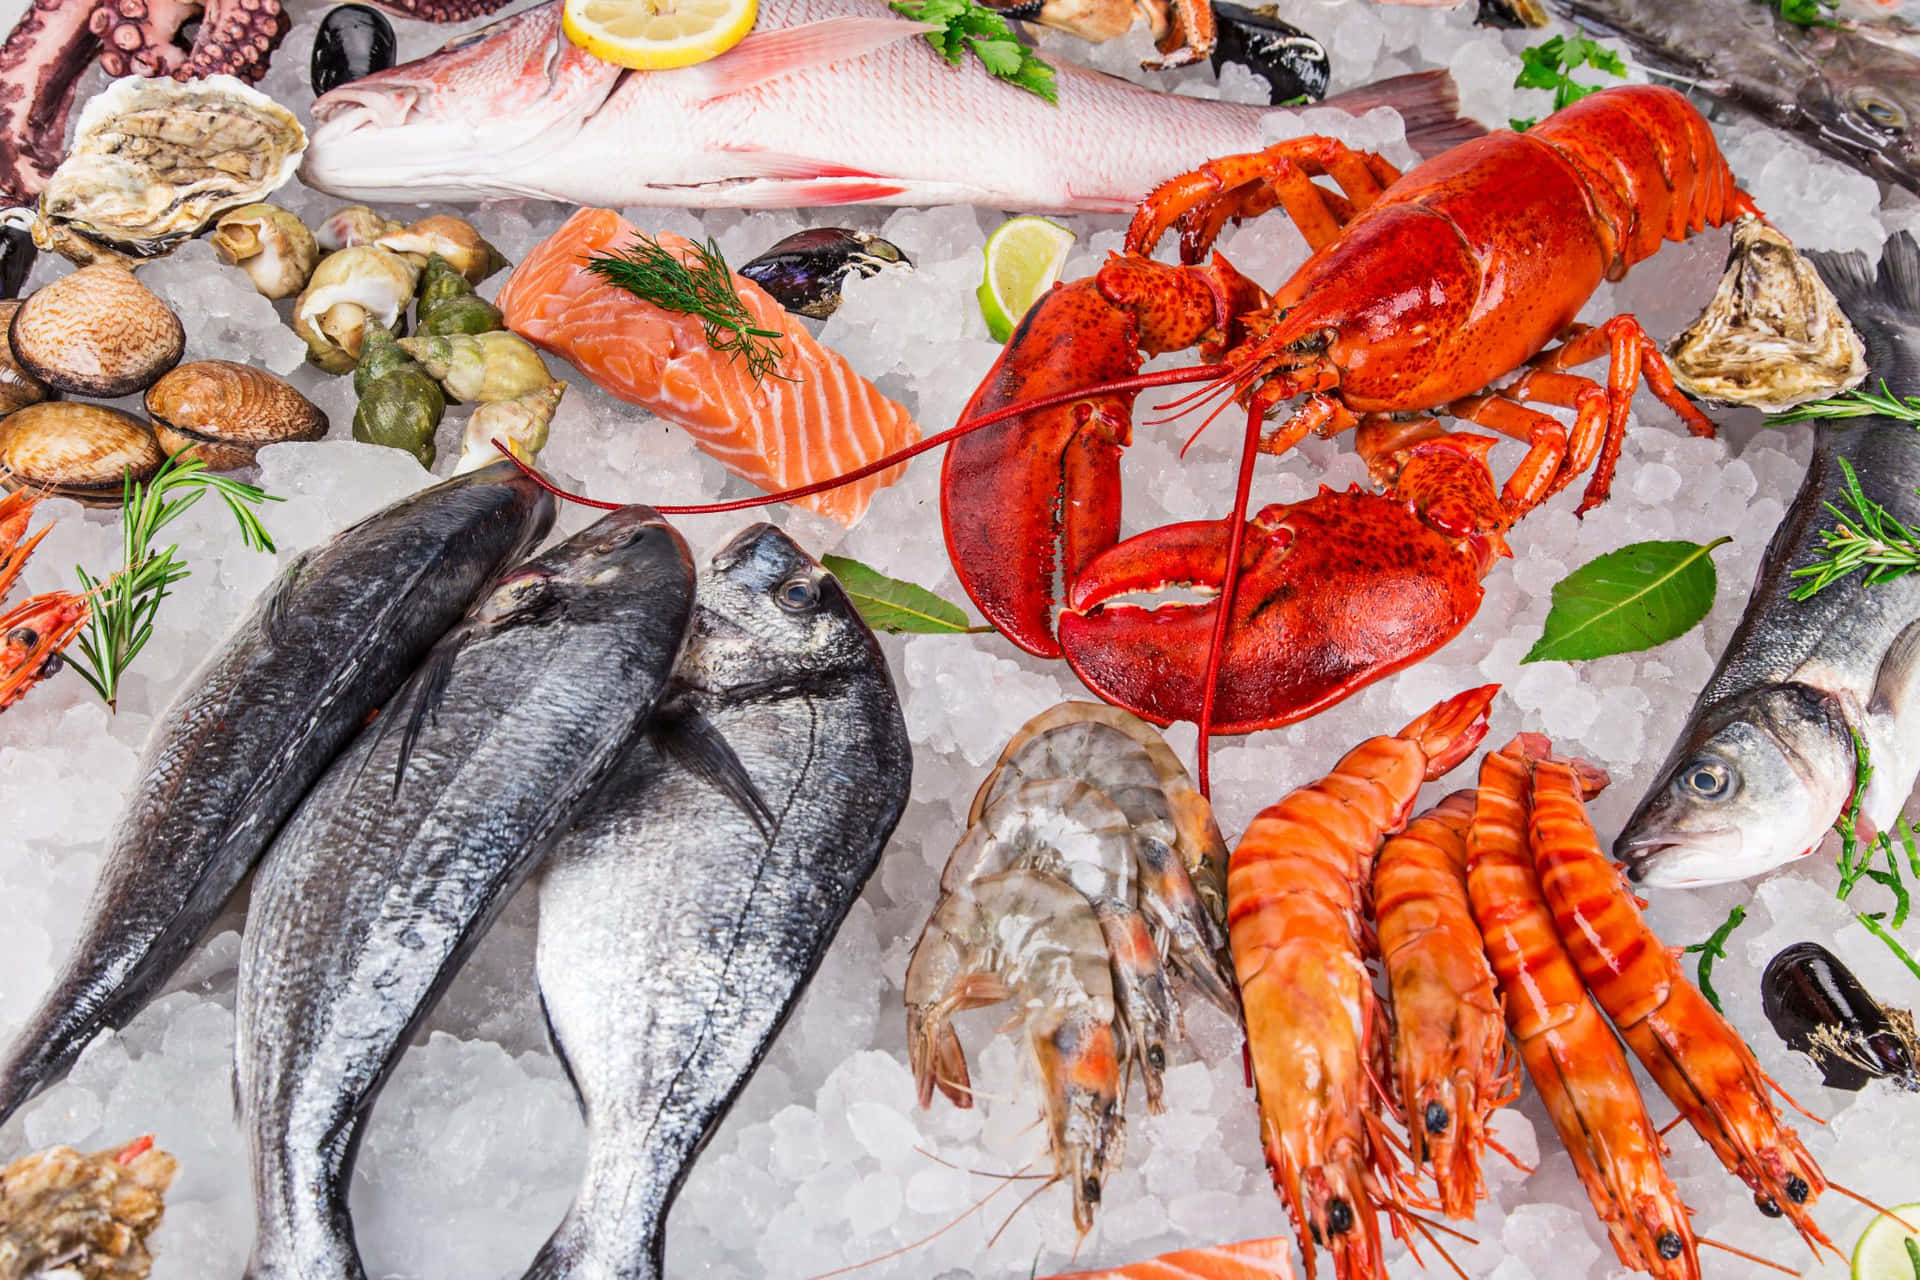 An array of colorful and delicious seafood dishes